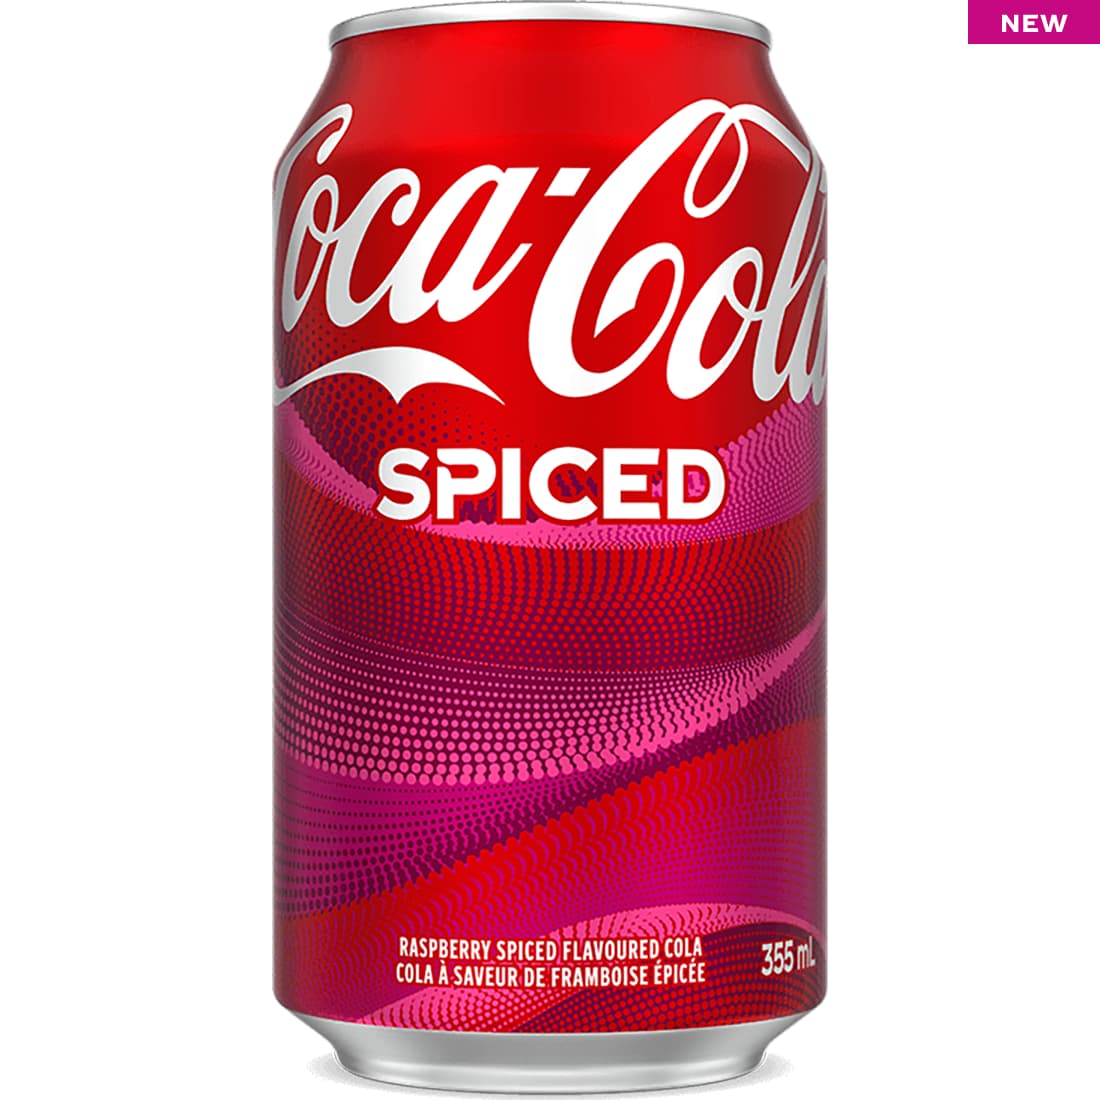 NEW Coca-Cola Spiced 355 mL can